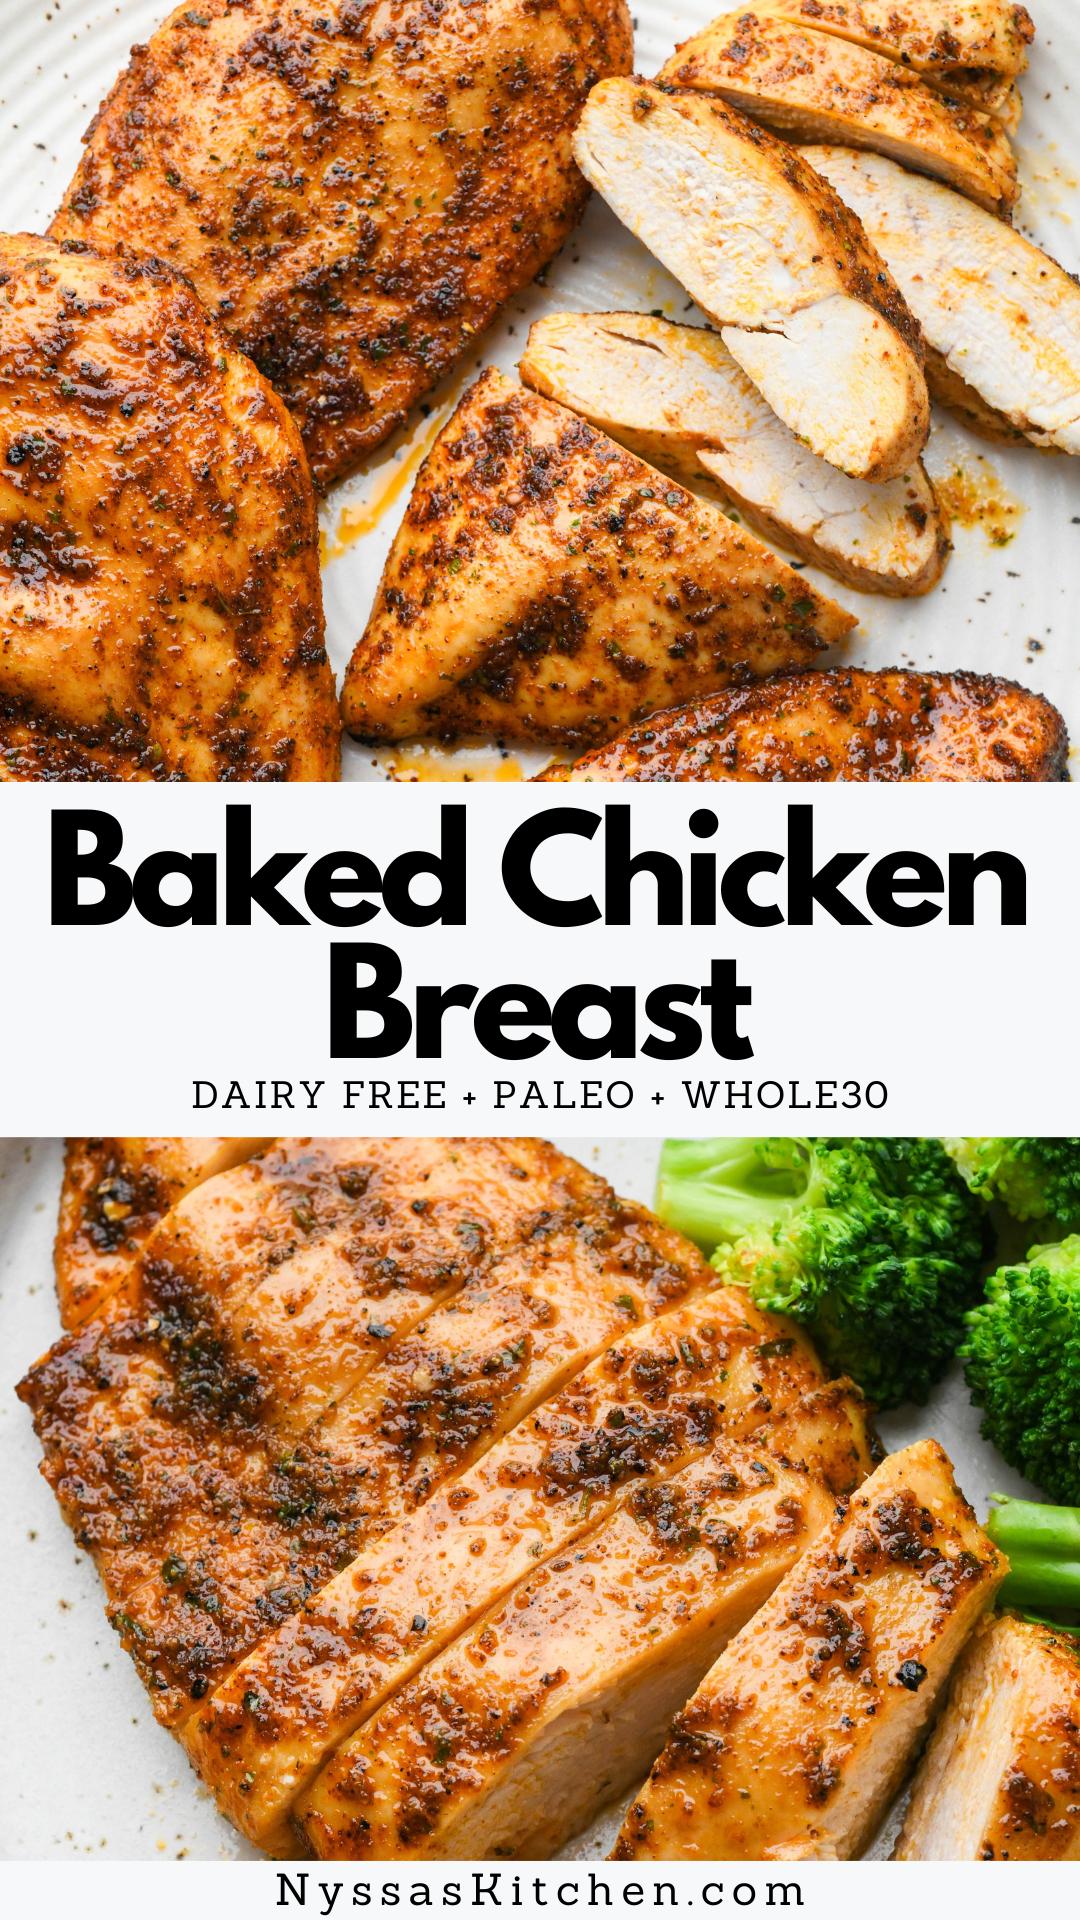 This baked chicken breast recipe is an absolute staple for healthy meal prep! Not only are they super easy to make, but the chicken breasts come out perfect every time - juicy, moist, and incredibly flavorful. Say goodbye to dry, bland chicken for good! Ready in less than 30 minutes and gluten free, dairy free, paleo, Whole30, and keto friendly.